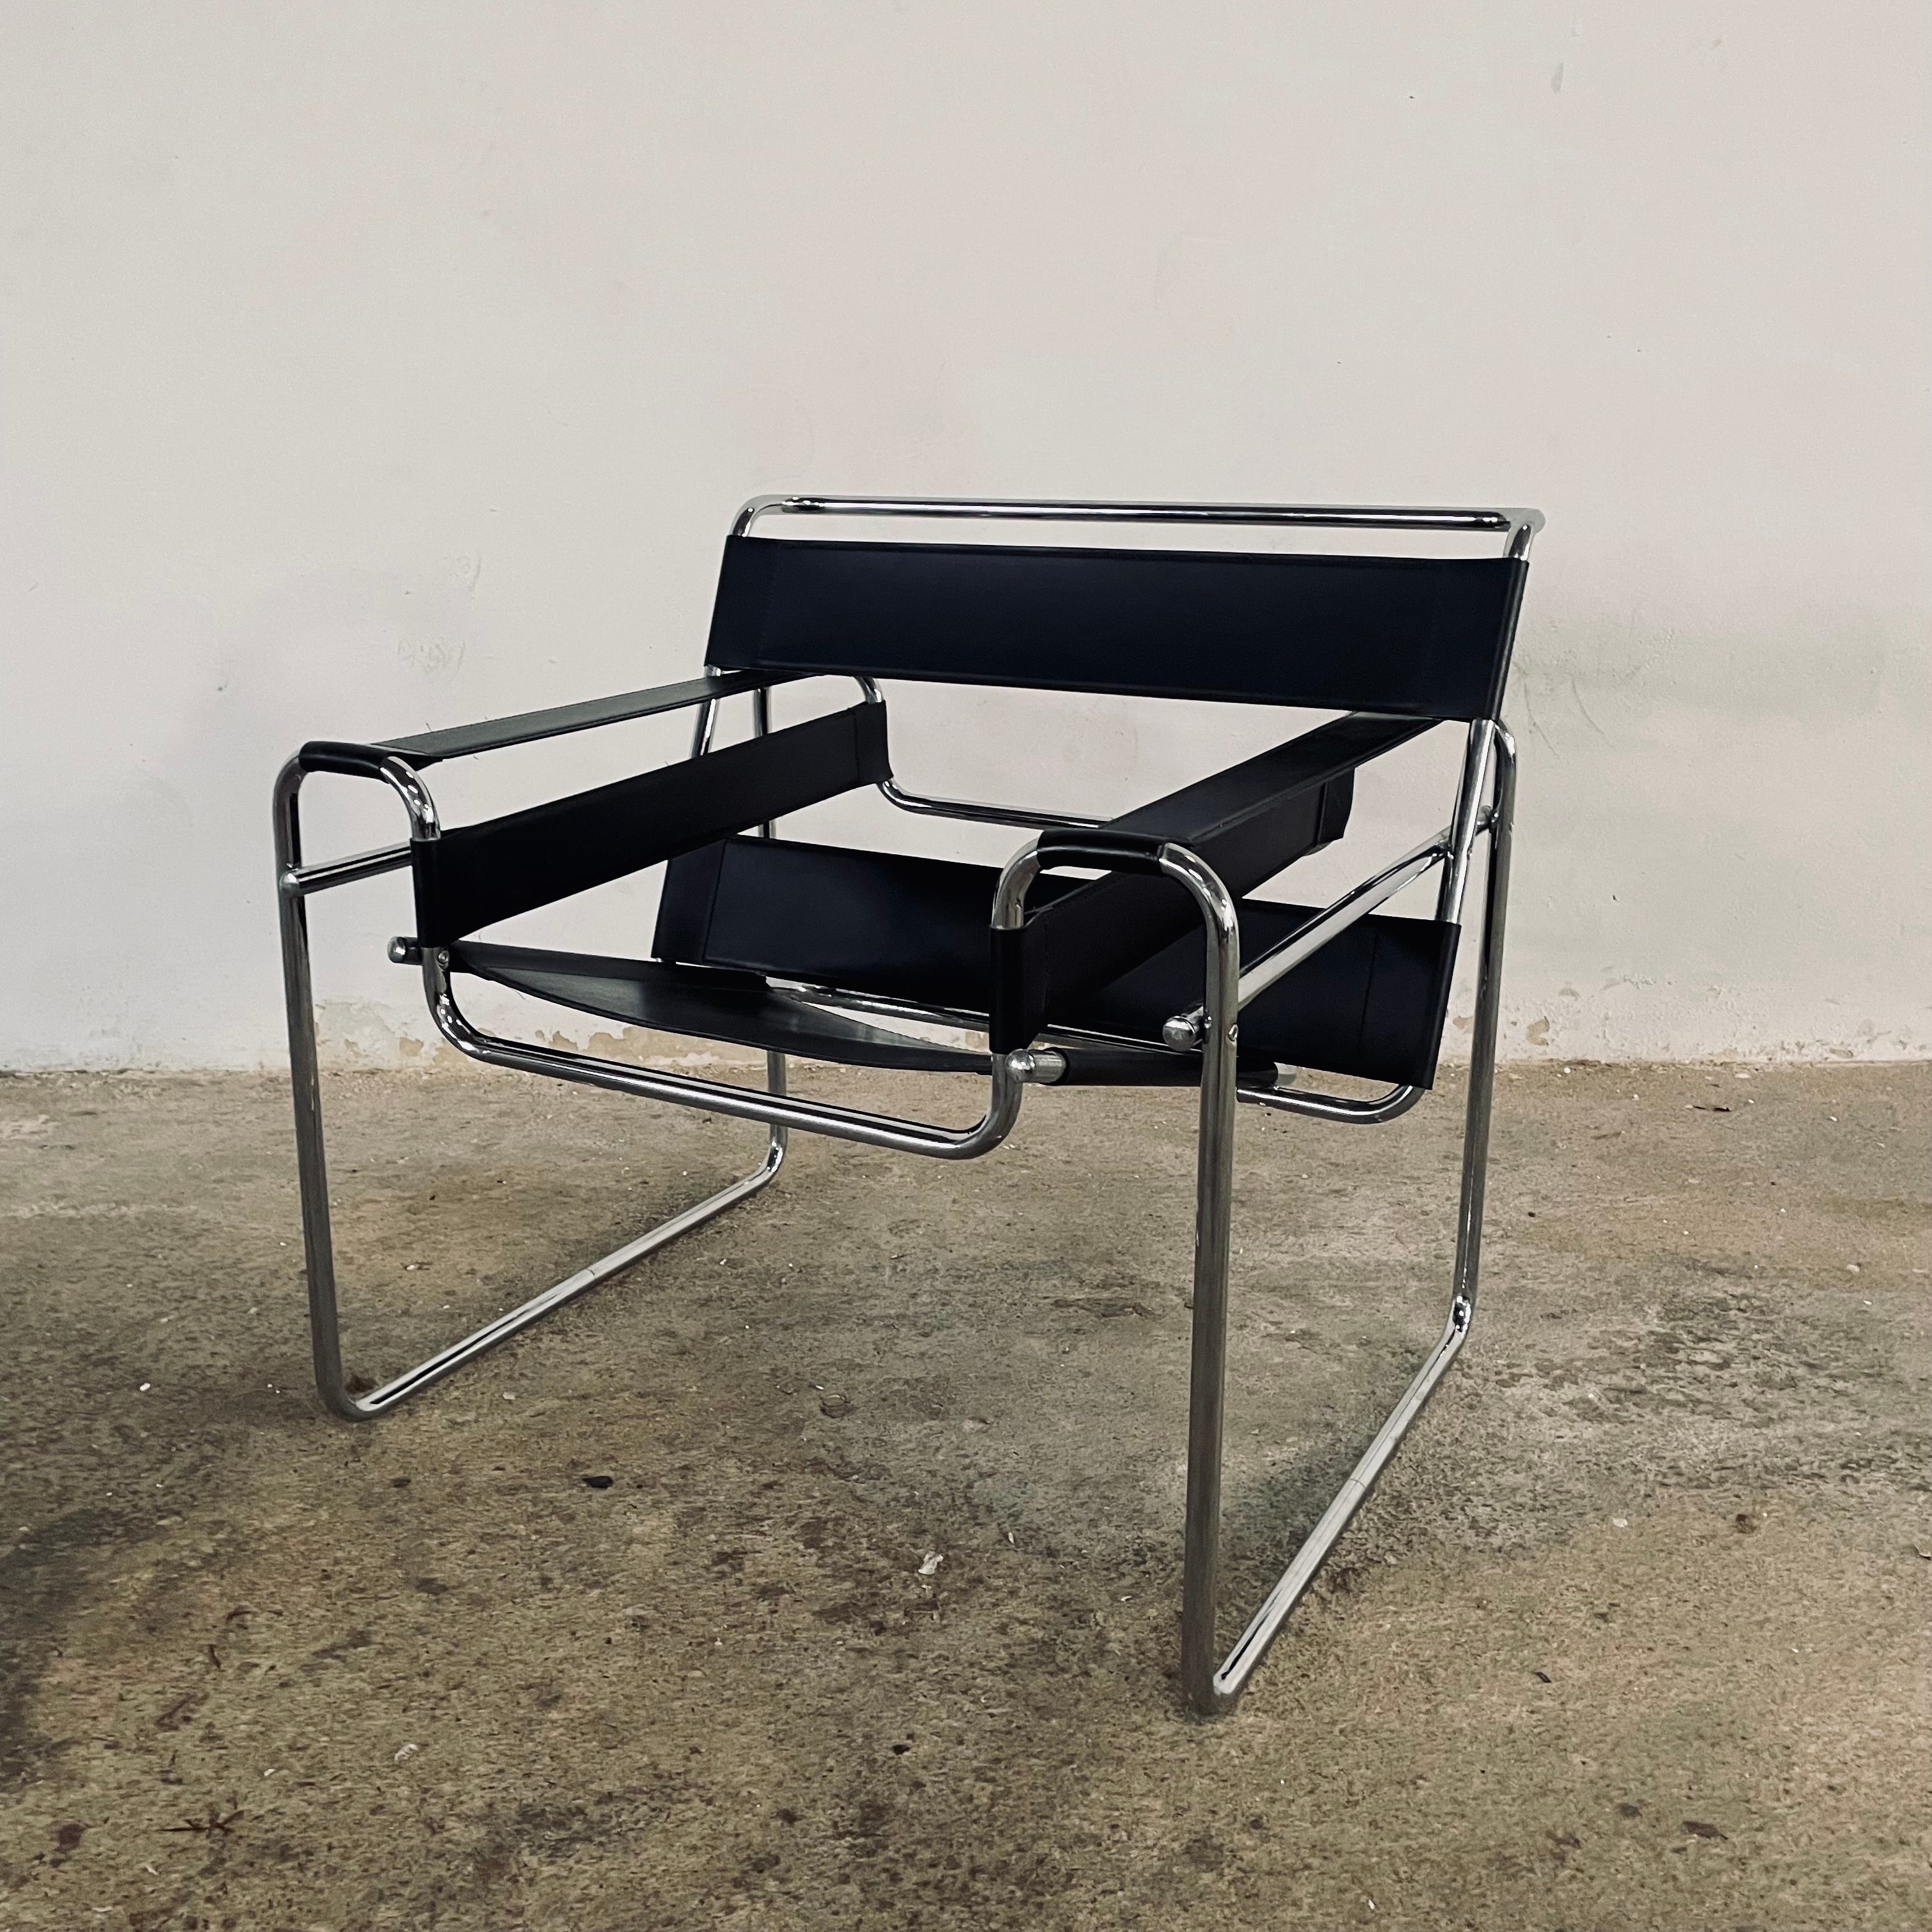 Vintage original condition Wassily chair inspired by the Marcel Breuer for Knoll International A.K.A. B3. Chair, Black Leather and bent Tubular Chrome Steel Arm Chair, Made in Italy circa 1960s
There’s no markings or visible labels present 

This